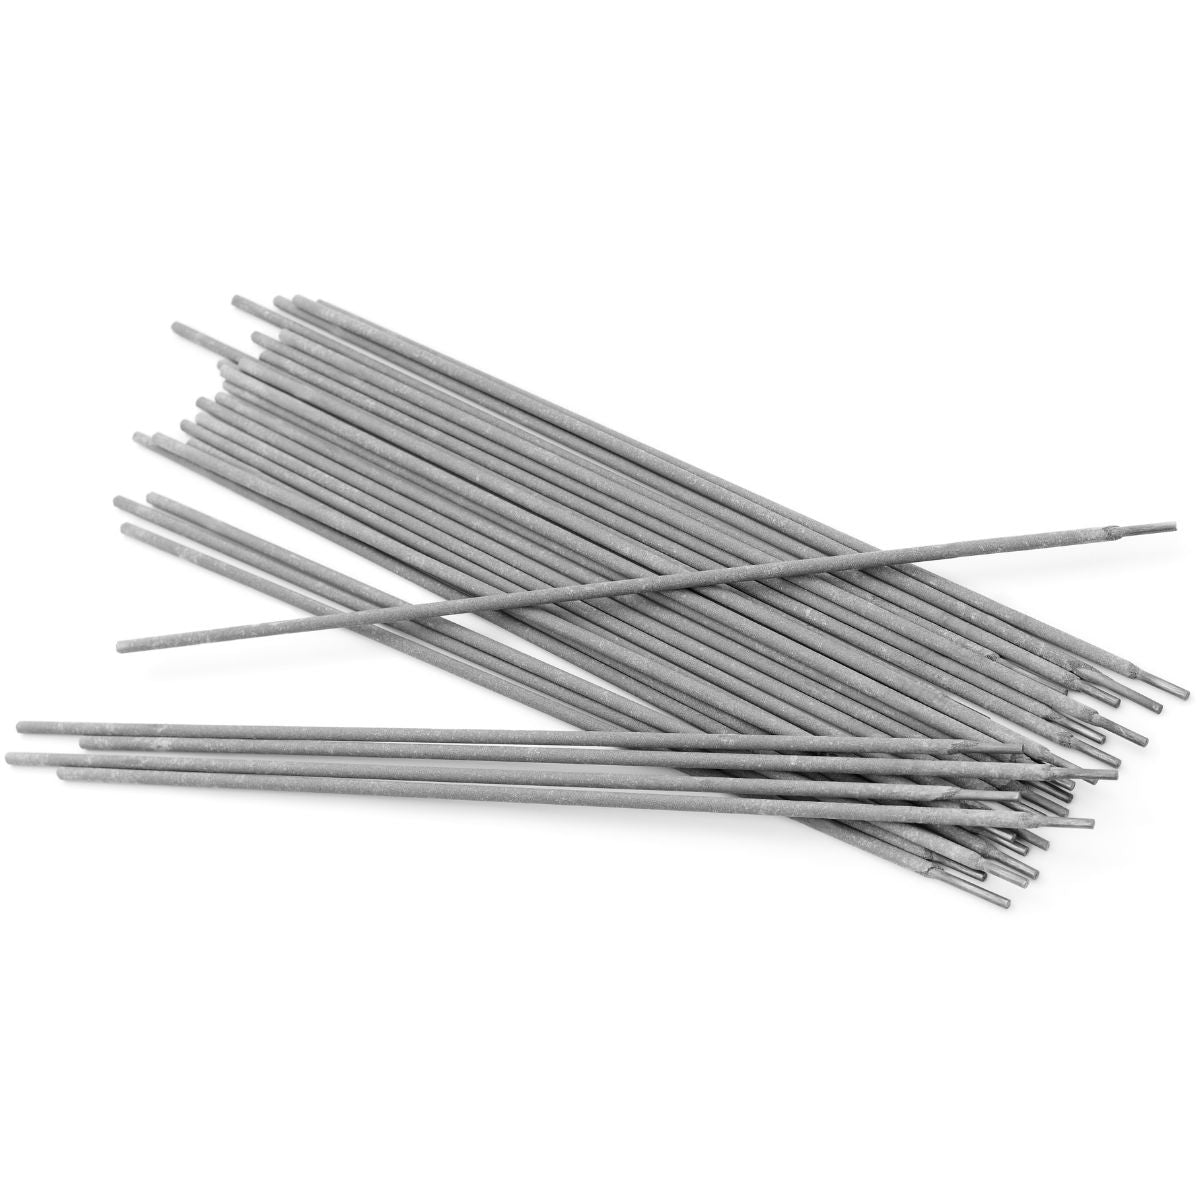 Low Hydrogen Welding Electrodes for Mild to Medium Tensile Steel 7016 (2.50/350) - 100 Pieces - South East Clearance Centre